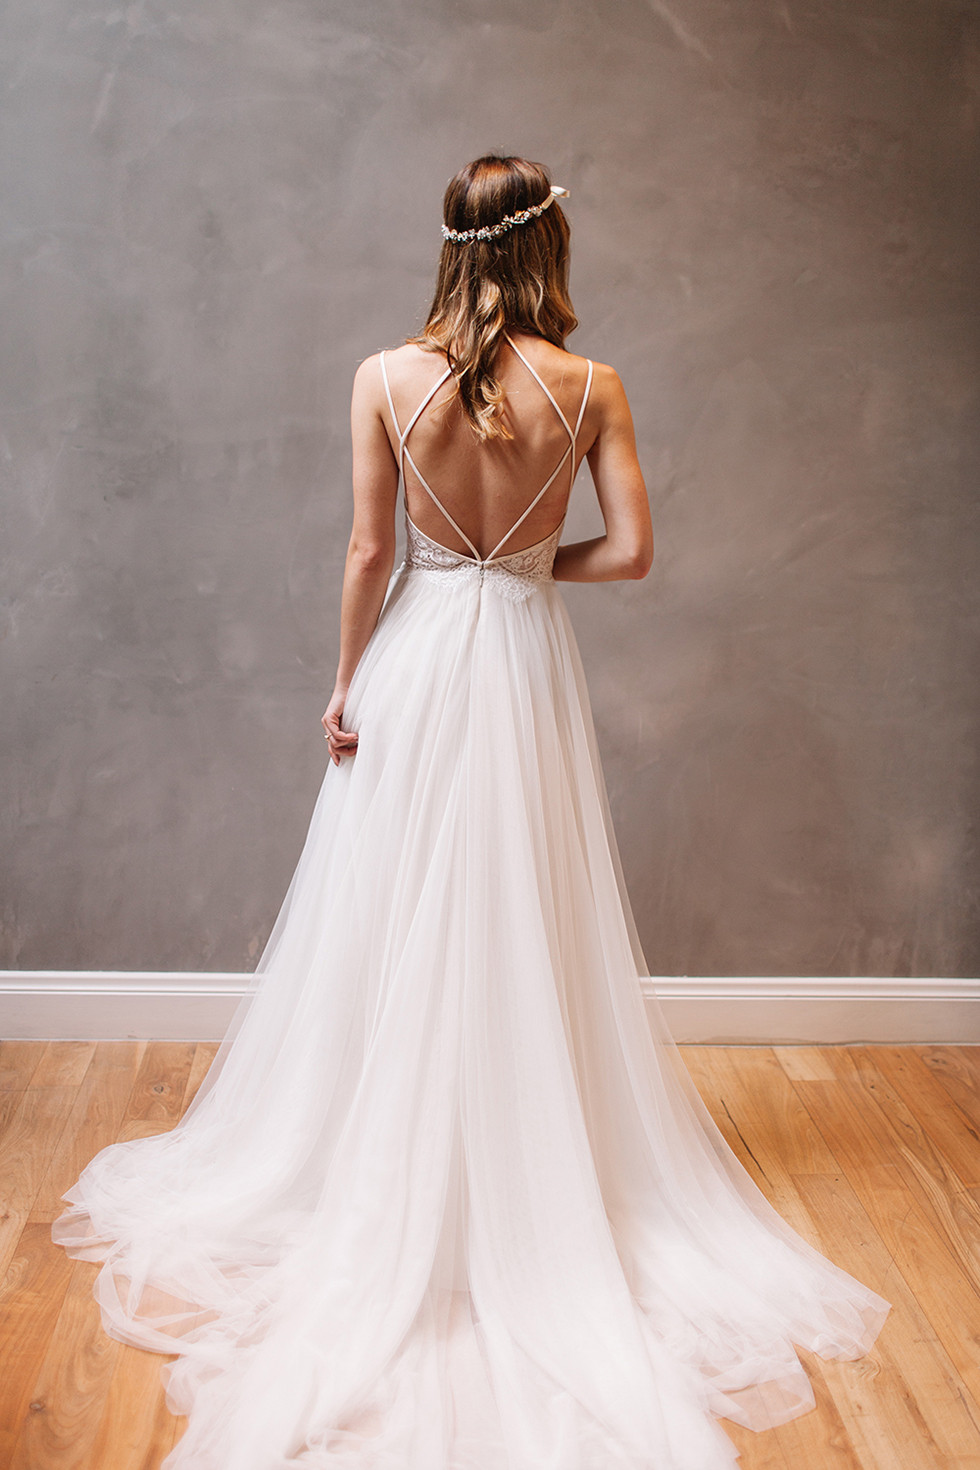 Lace And Tulle Wedding Dress
 y Backless Wedding Dress Spaghetti Straps Open Back